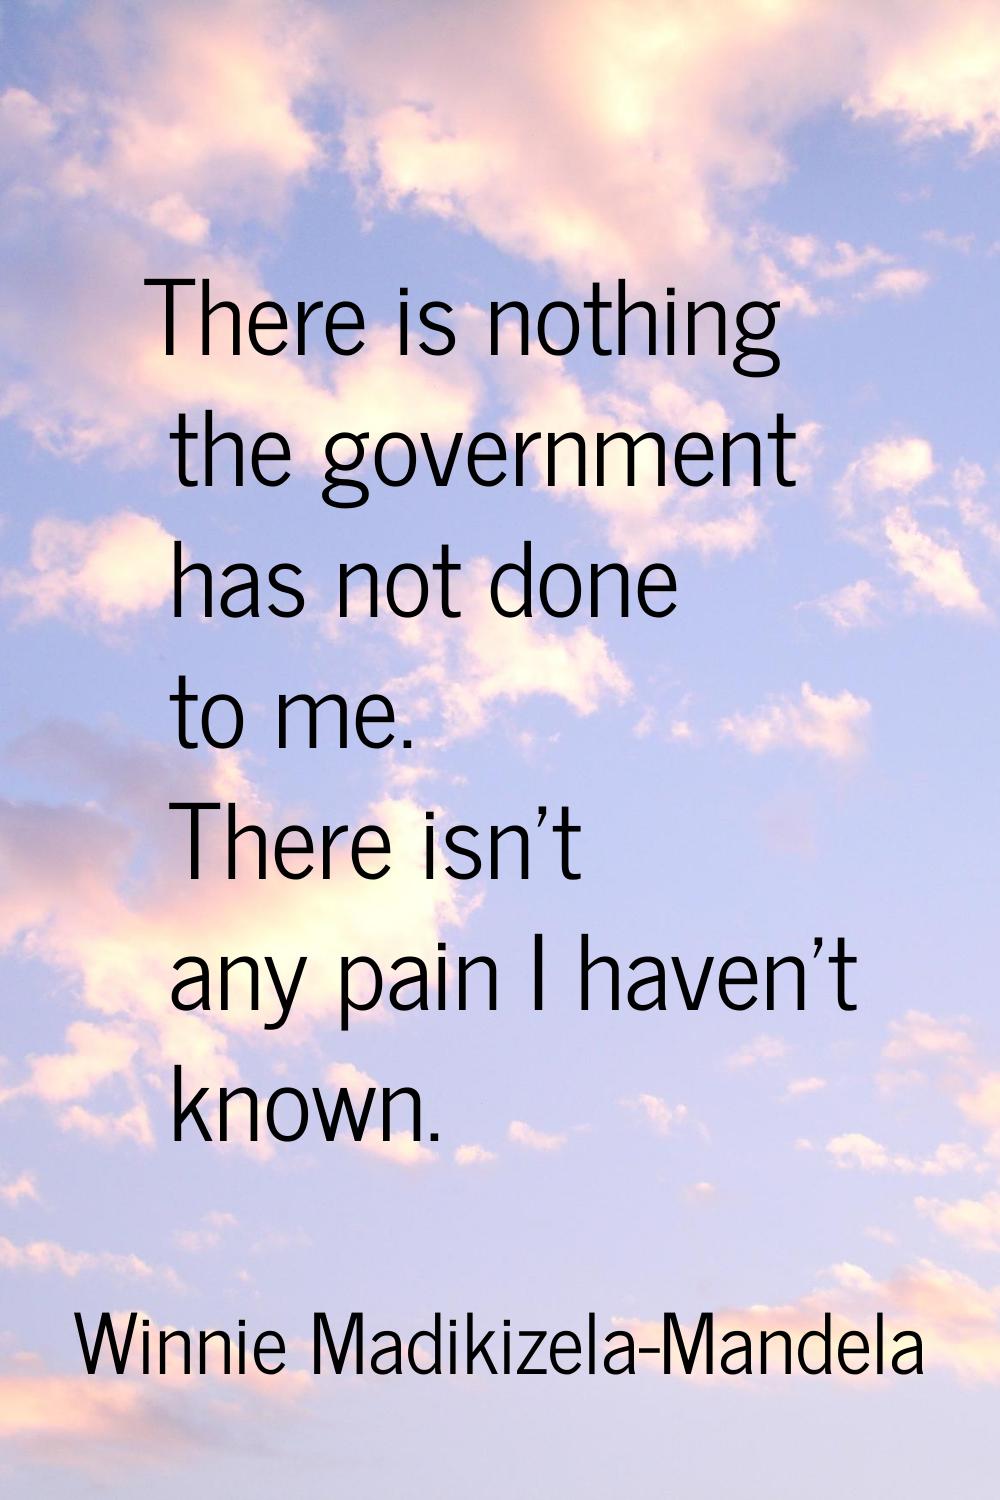 There is nothing the government has not done to me. There isn't any pain I haven't known.